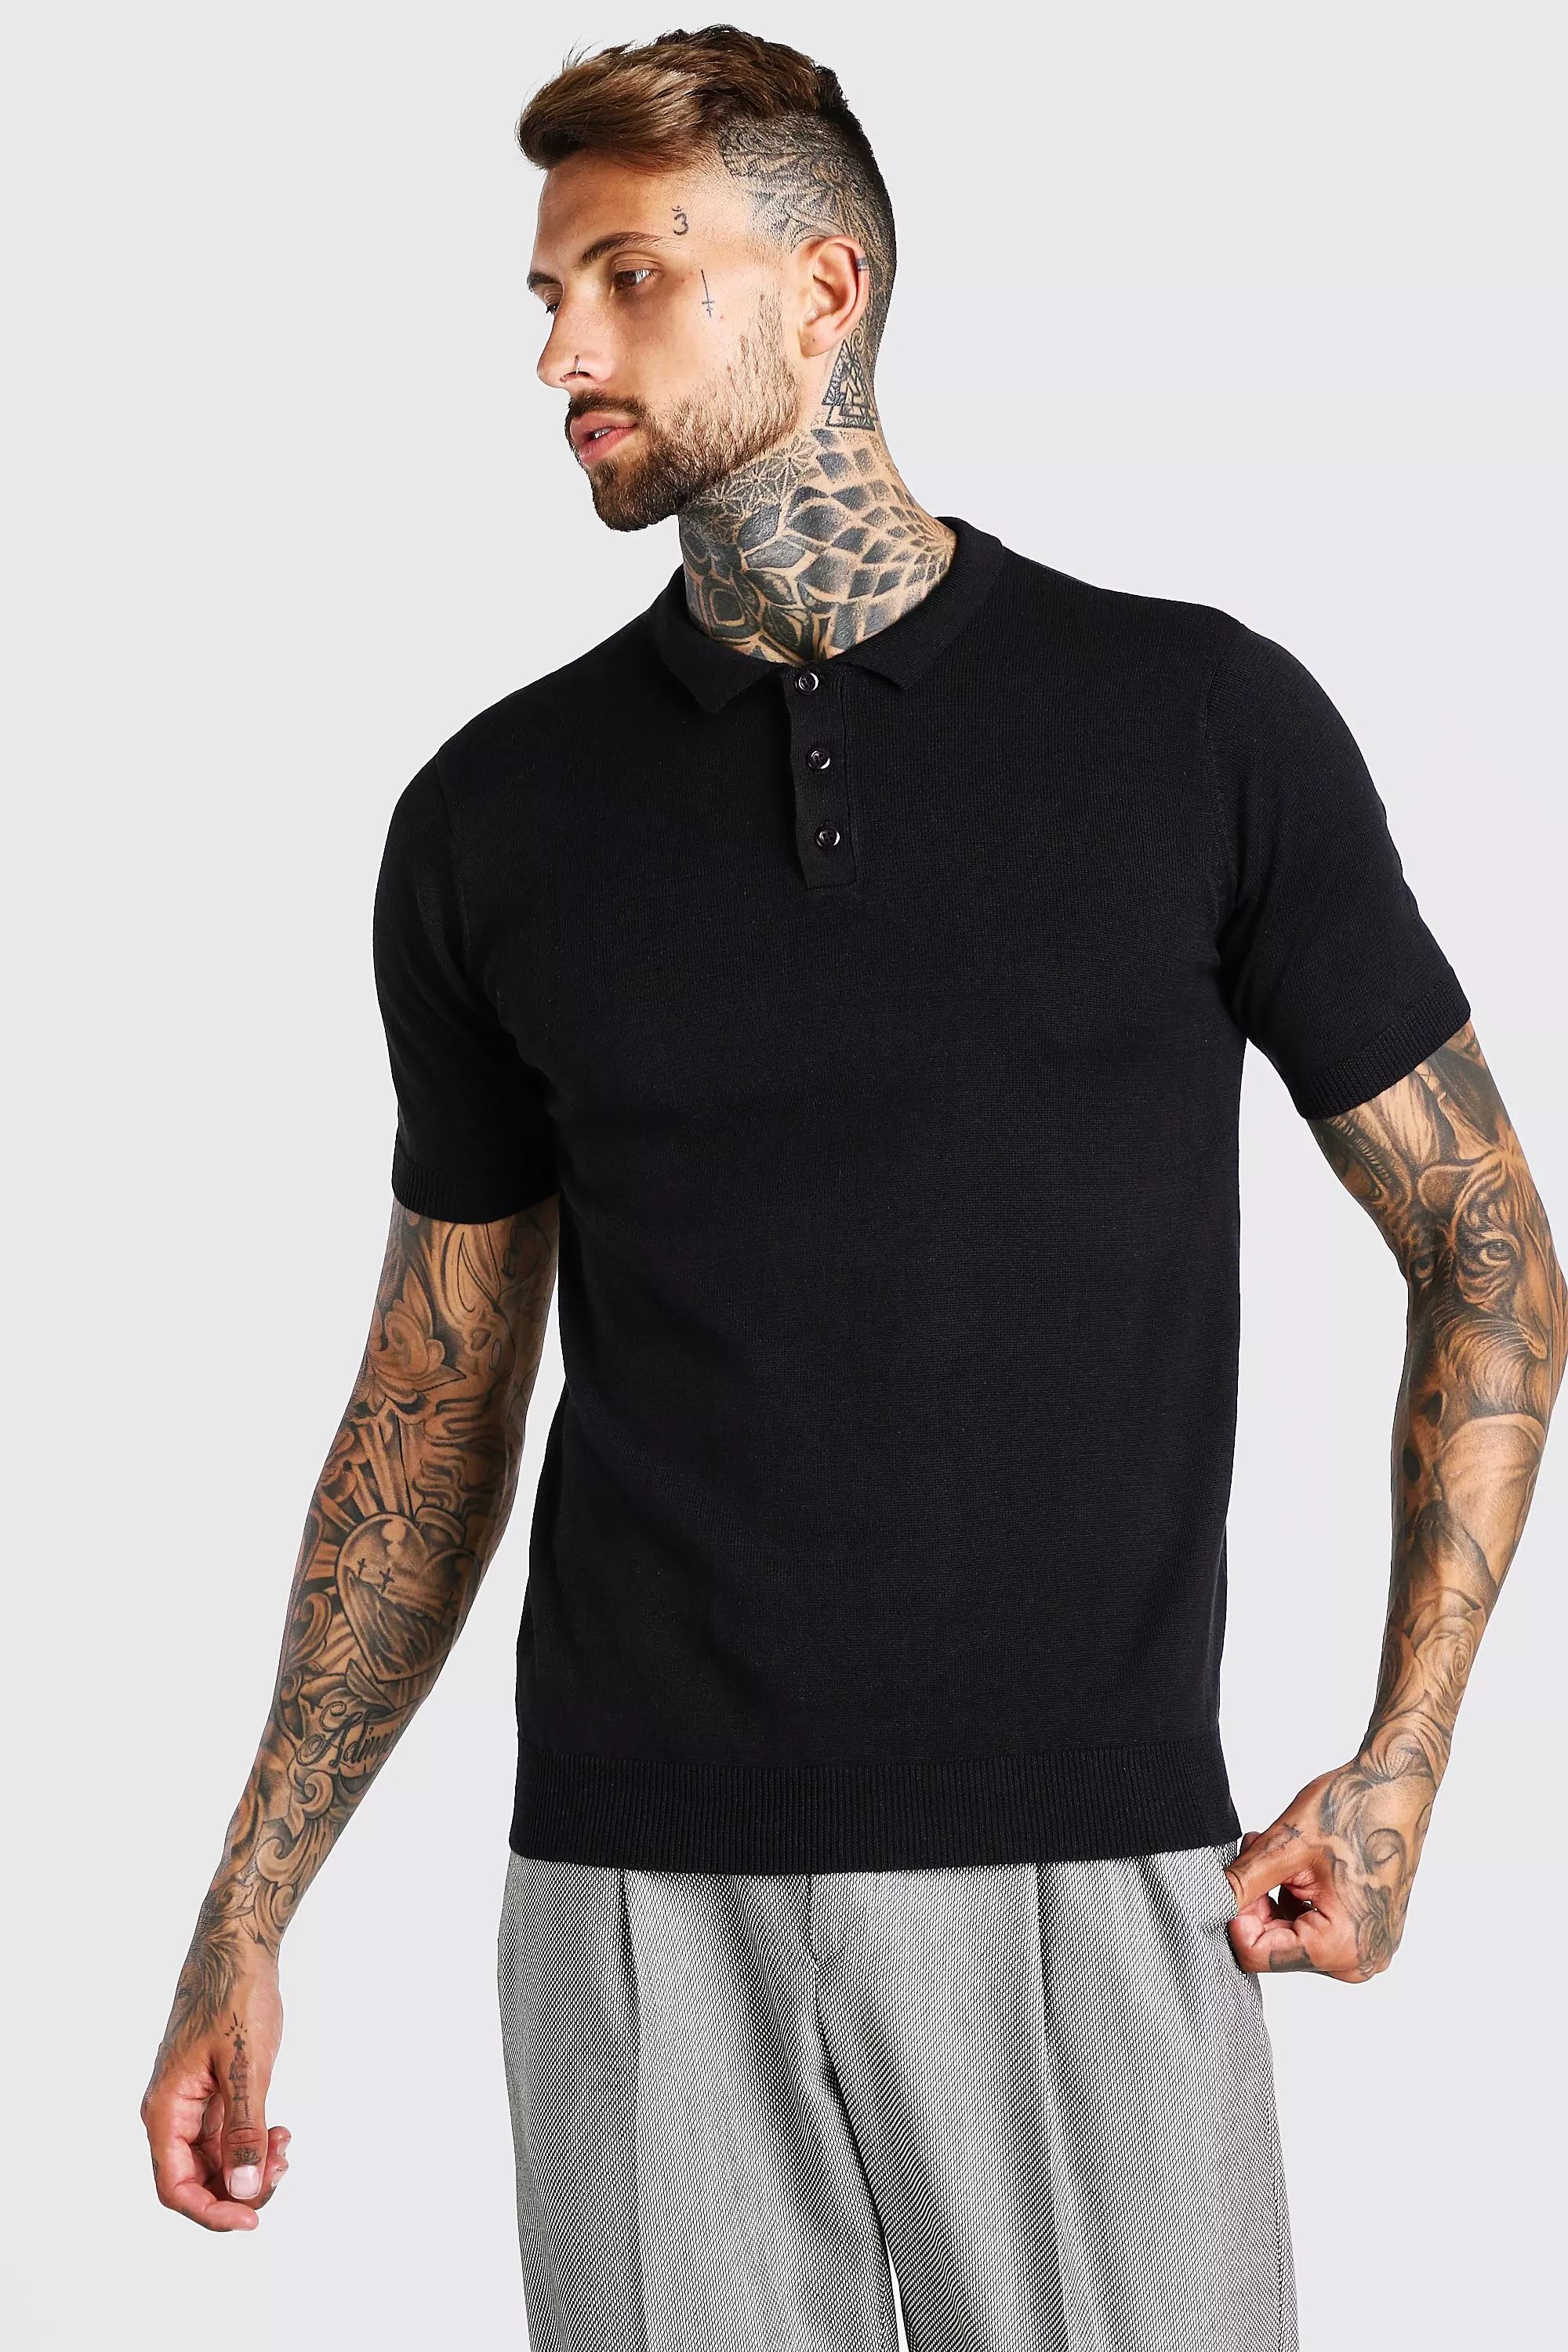 boohooMAN Mens Short Sleeve Muscle Fit Colour Block Knit Polo - Black